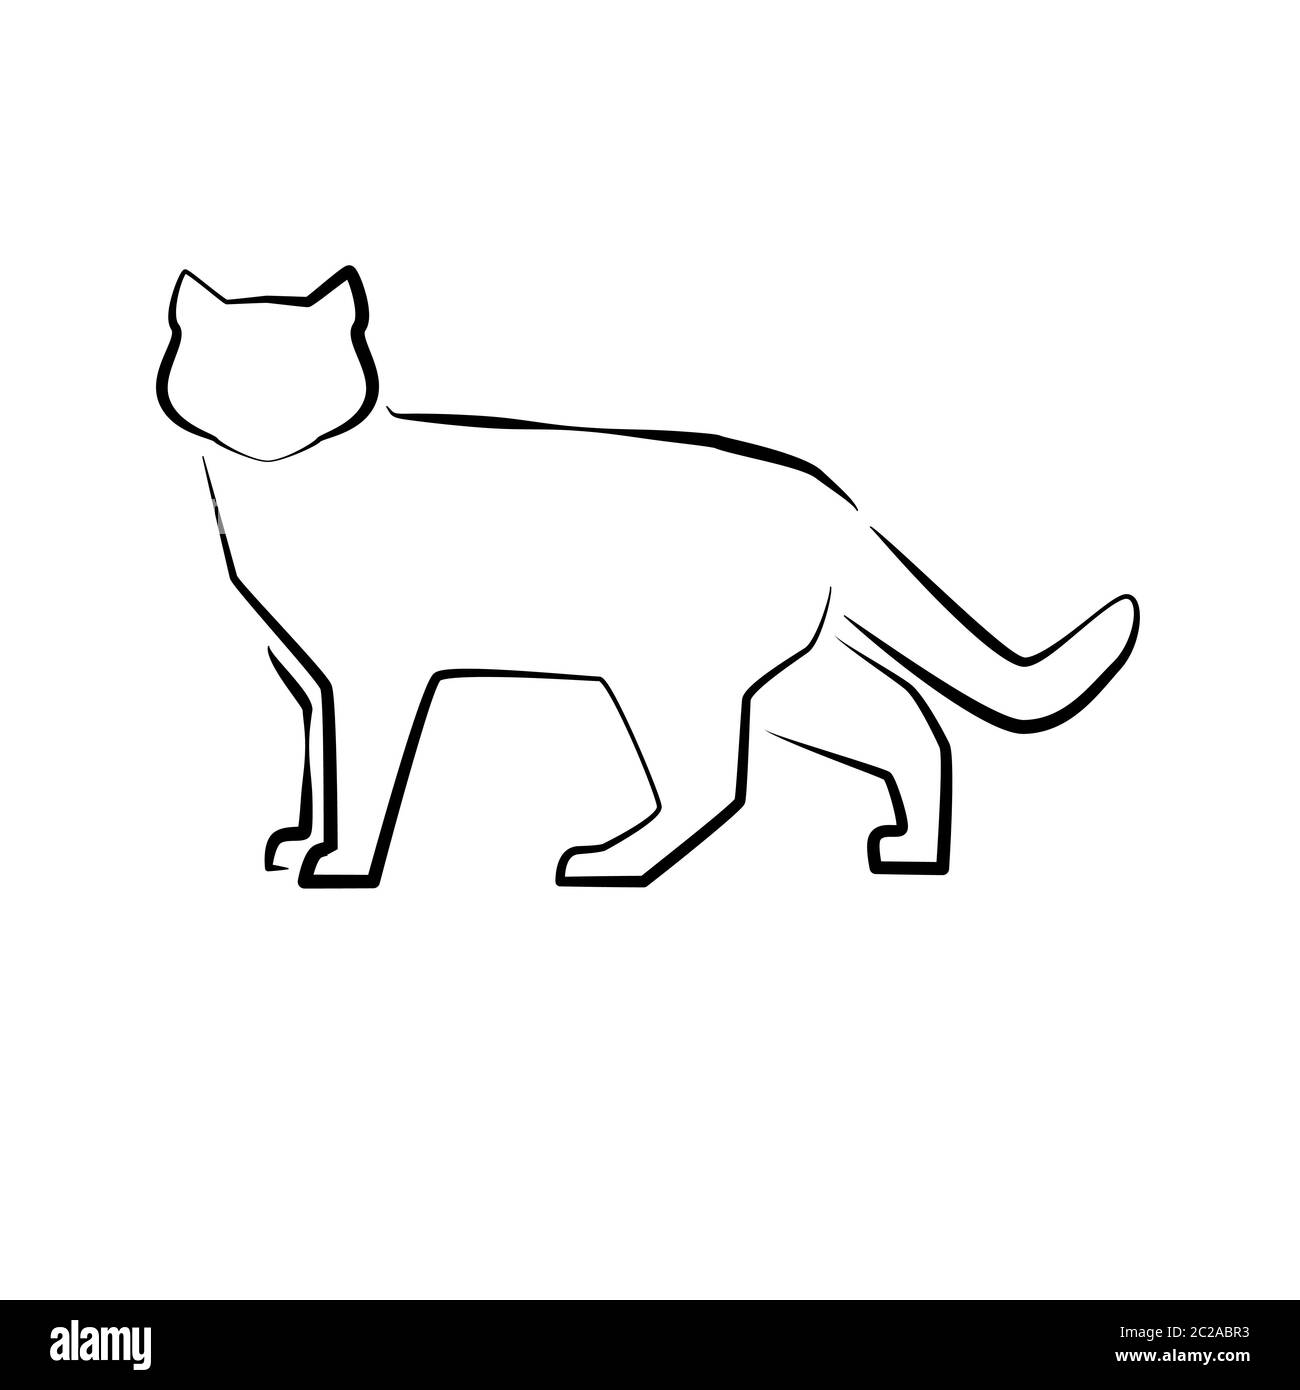 Cat icon images on